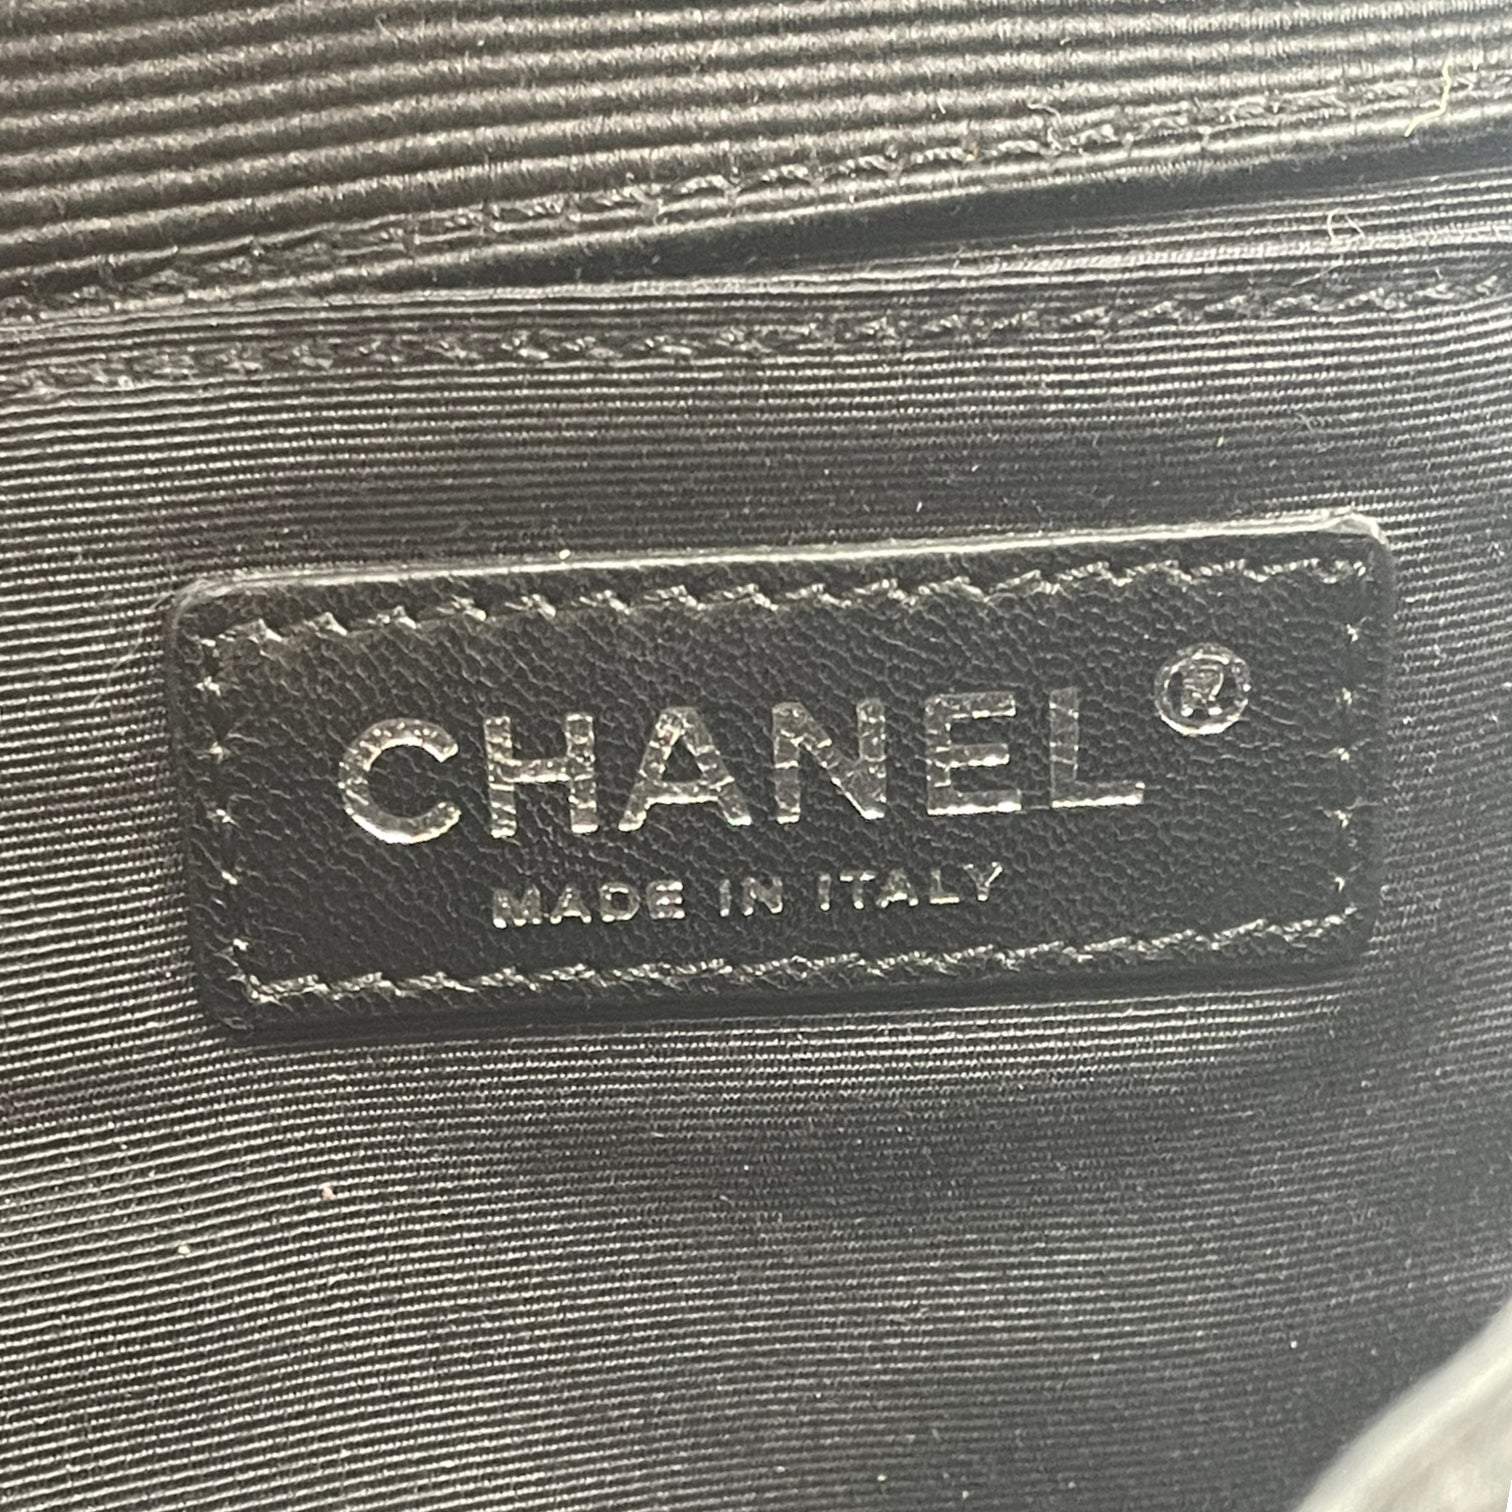 Chanel Reissue Black and White Bag